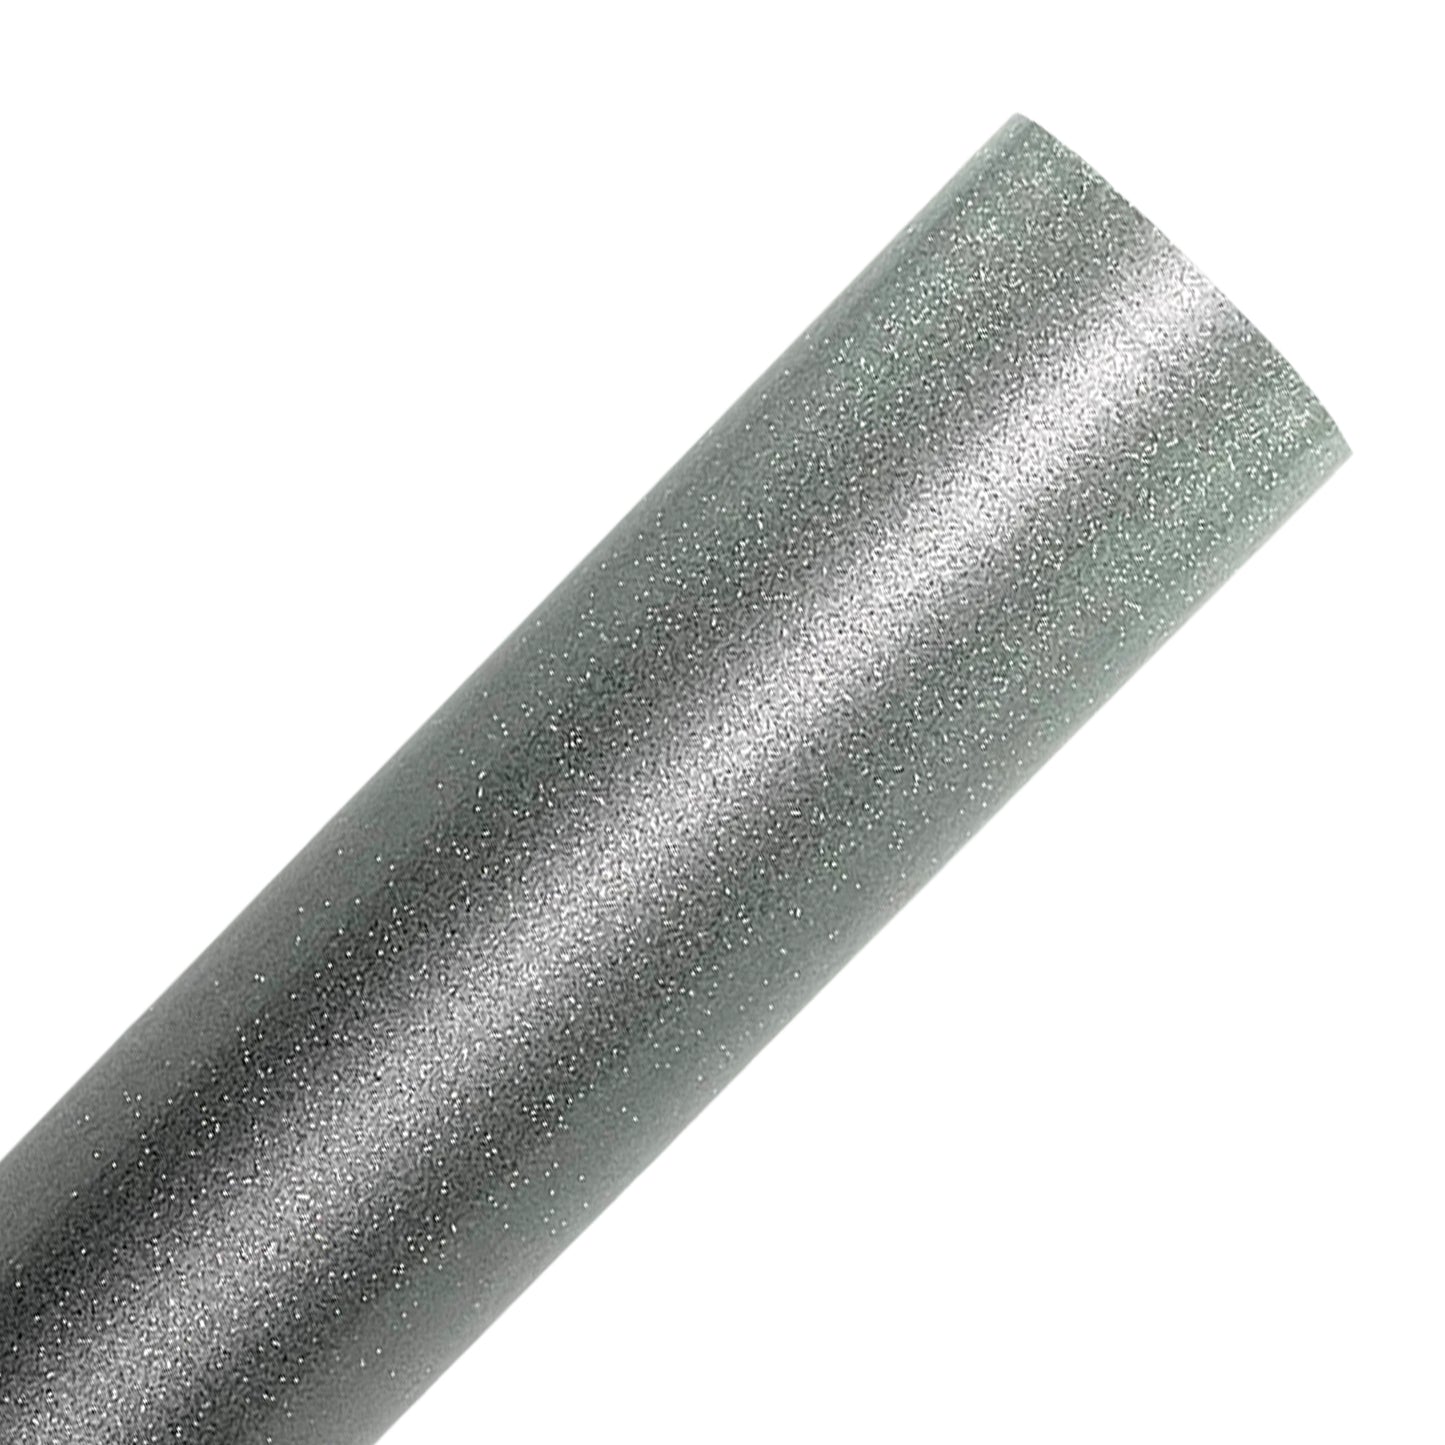 Silver Transparent Glitter Adhesive Vinyl Rolls By Craftables